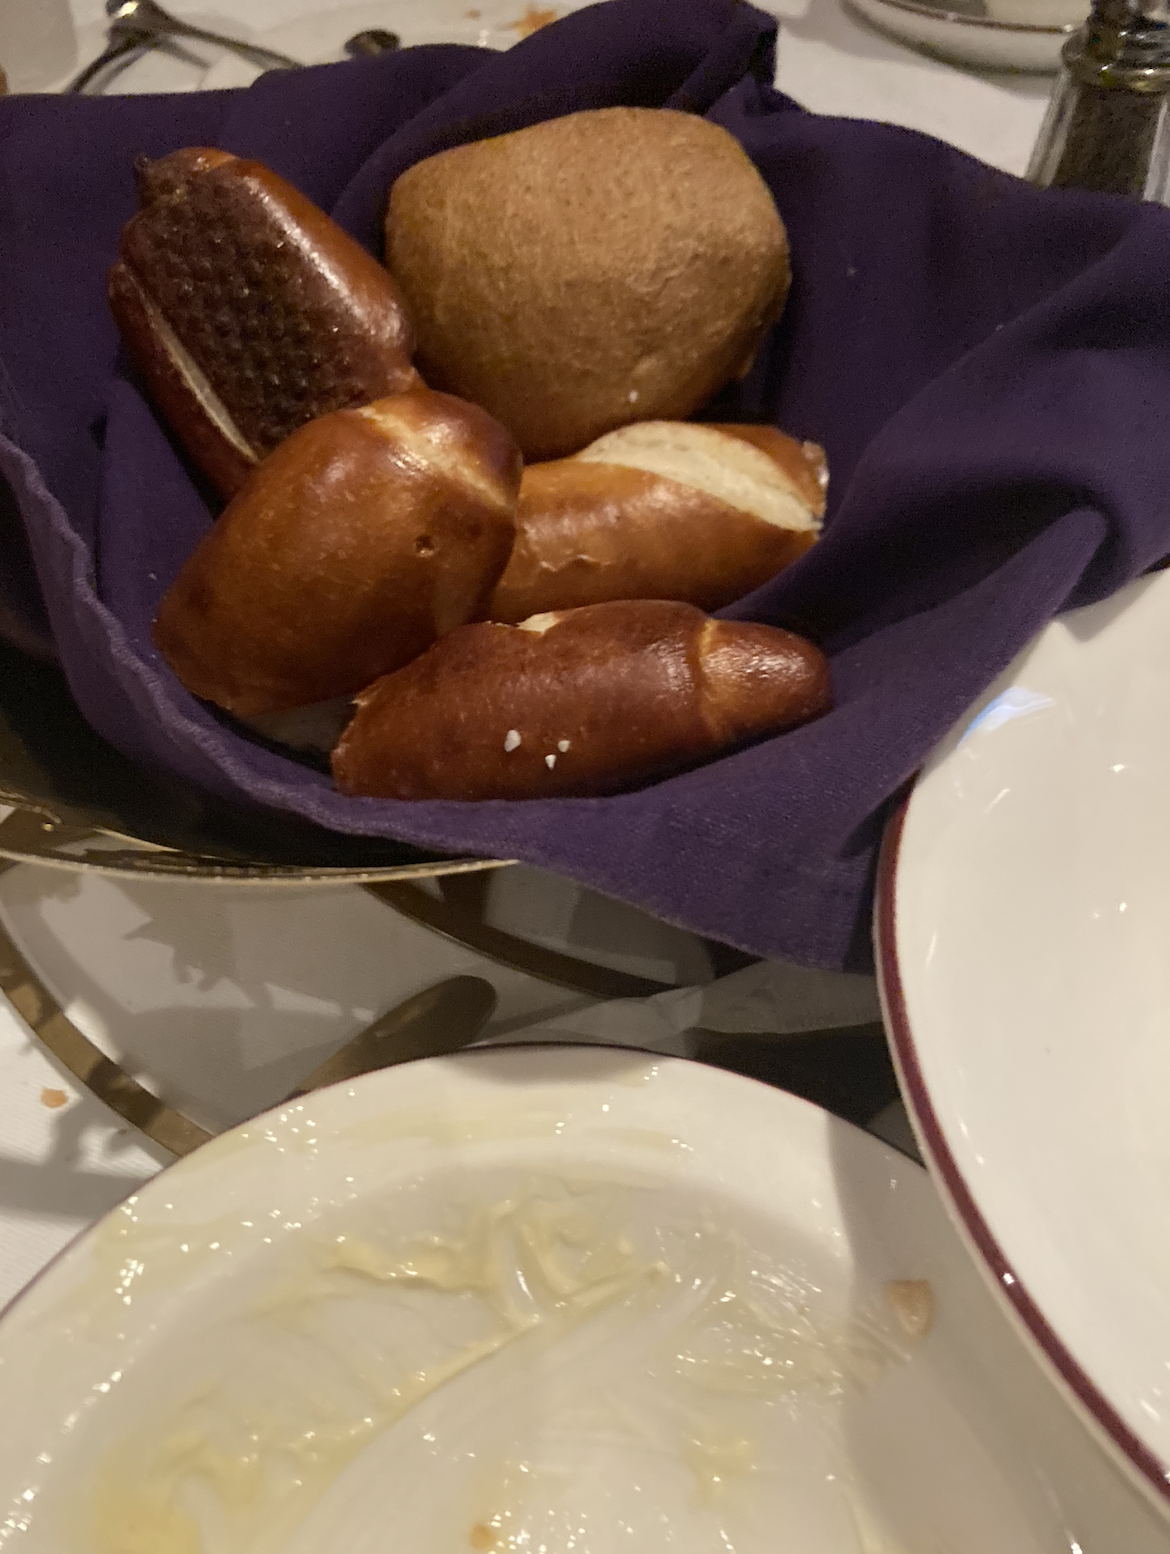 A basket lined with a cloth, filled with assorted bread rolls, sits on a dining table beside an empty dish with remnants of food